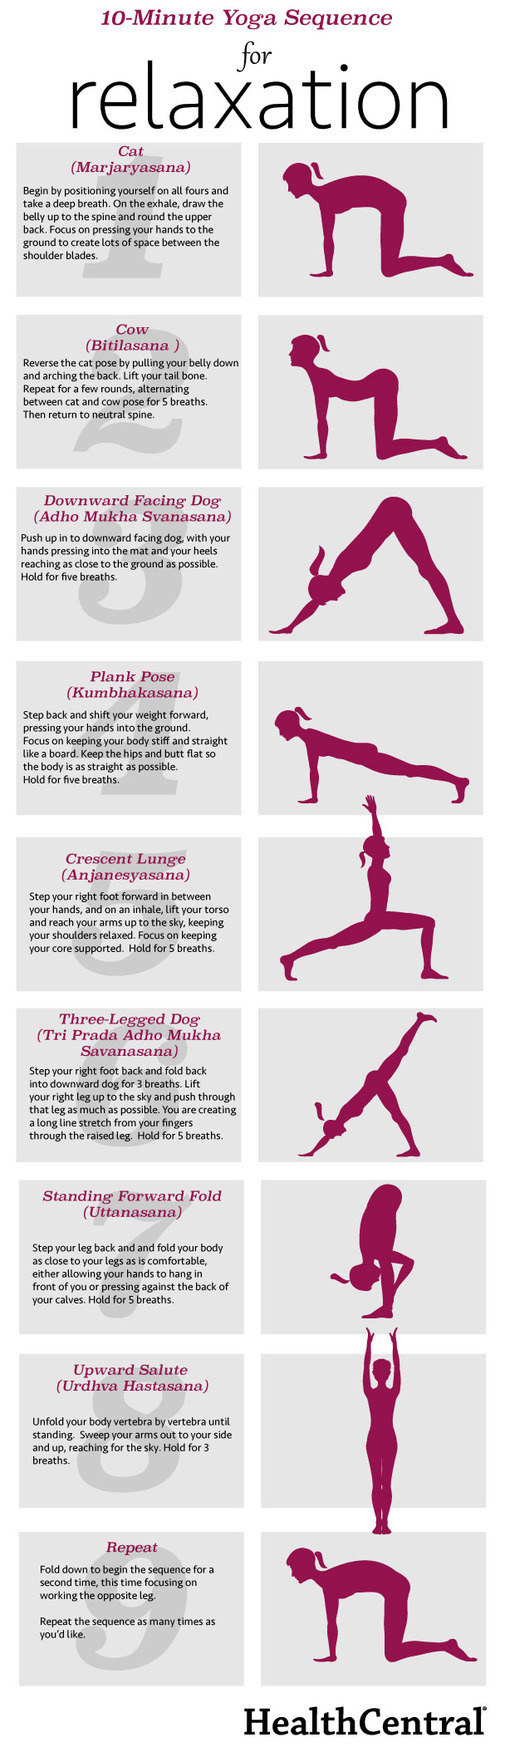 Do the Yoga Routine to Get Relaxed